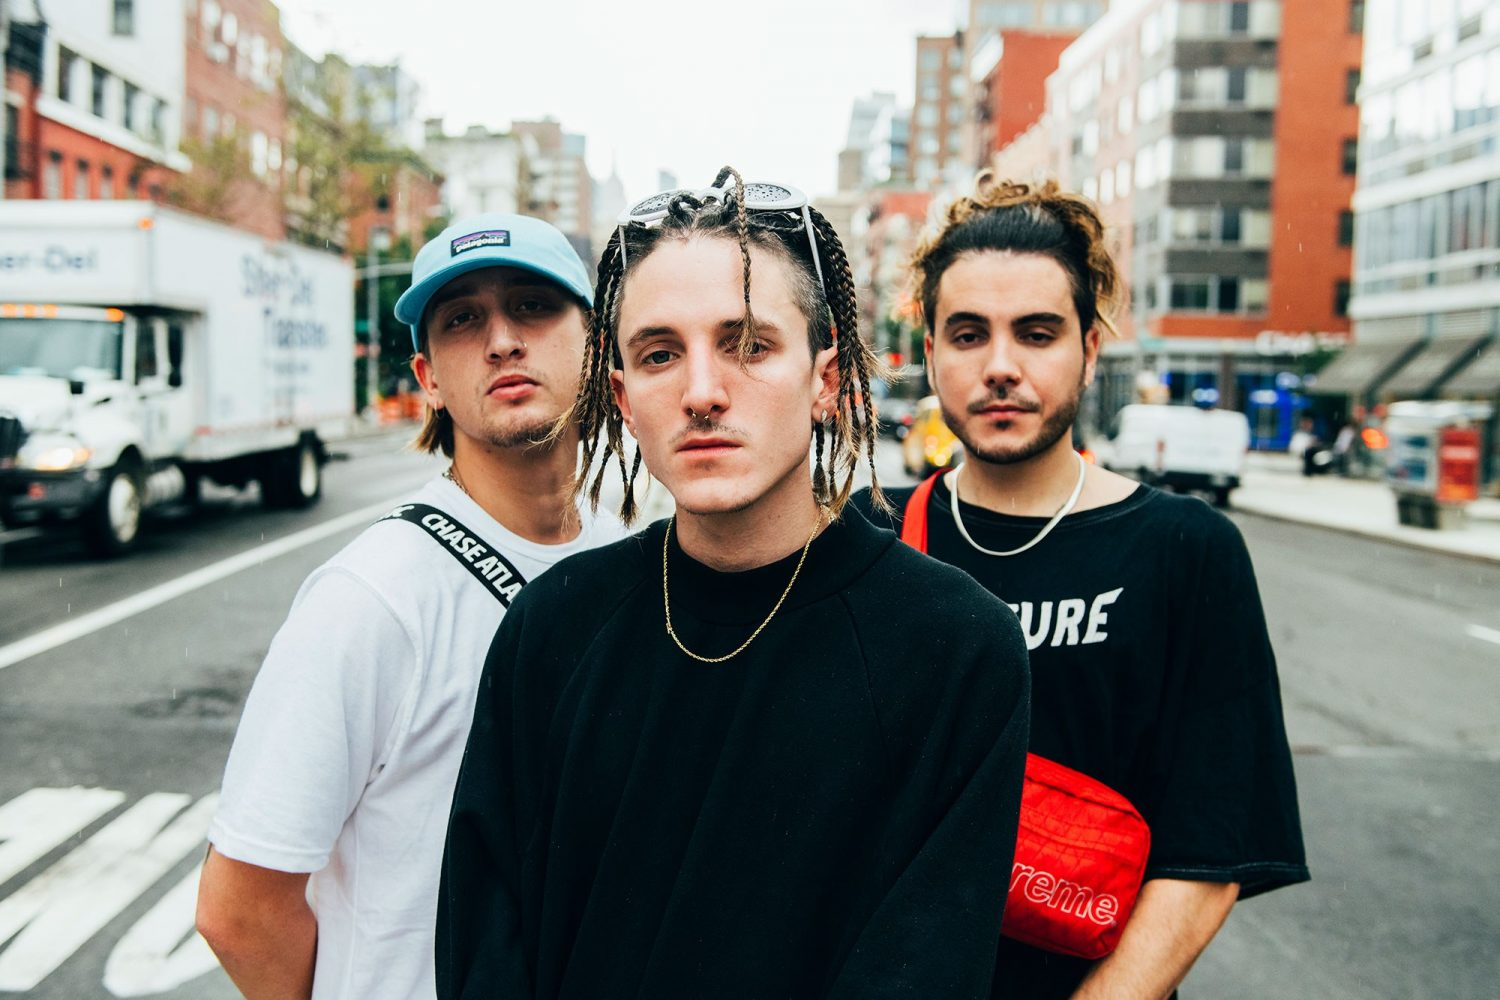 About Chase Atlantic Chase Atlantic Tickets